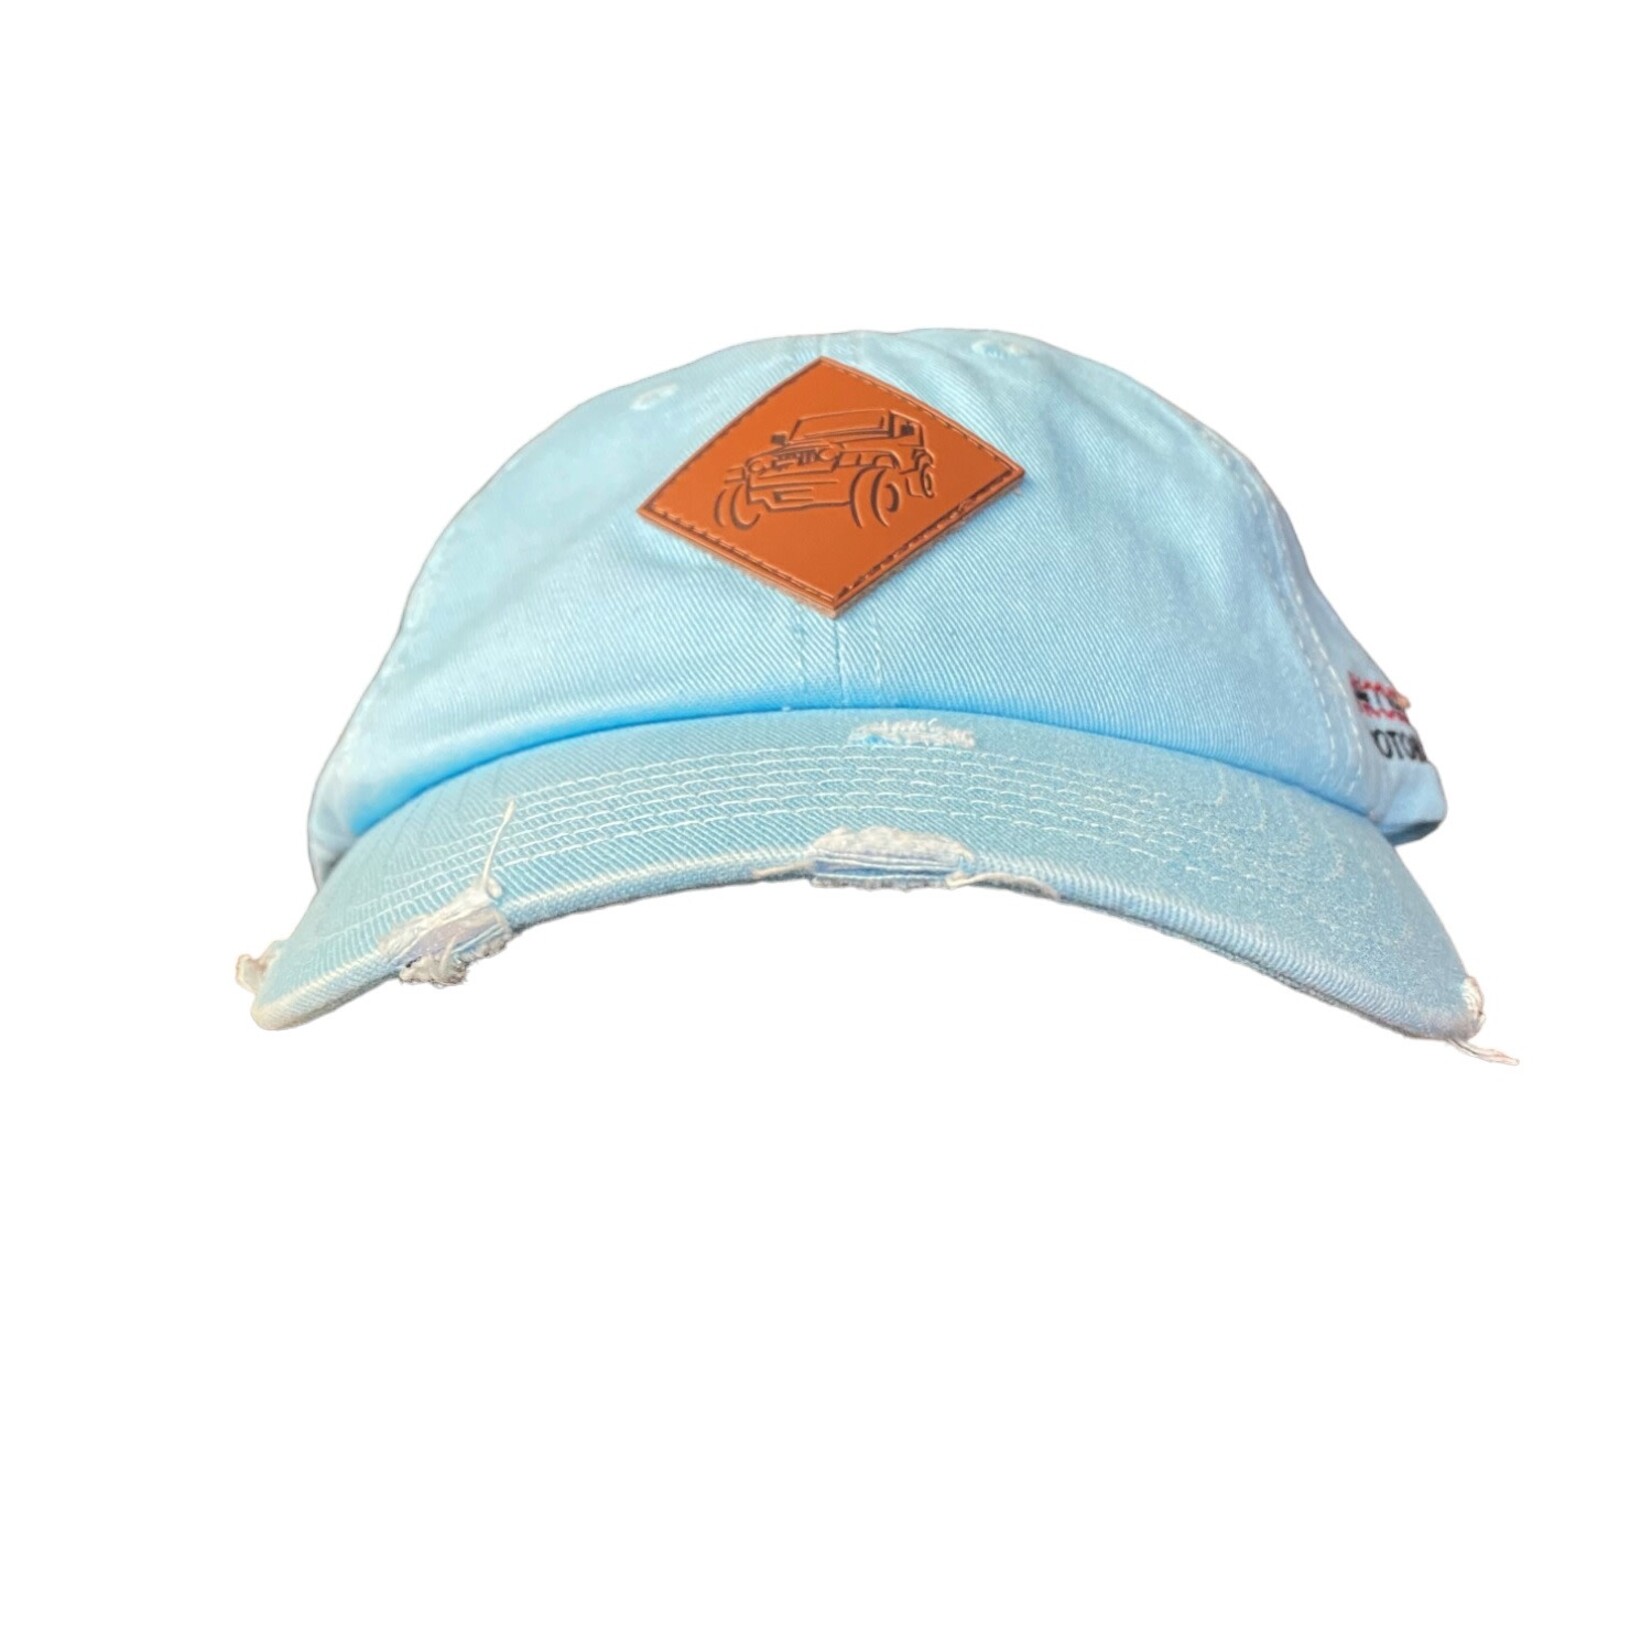 INCORRIGIBLE MOTORSPORTS INCORRIGIBLE OFF-ROAD WOMENS LEATHER PATCH 6 PANEL UNSTRUCTURED DISTRESSED SNAP BACK HAT